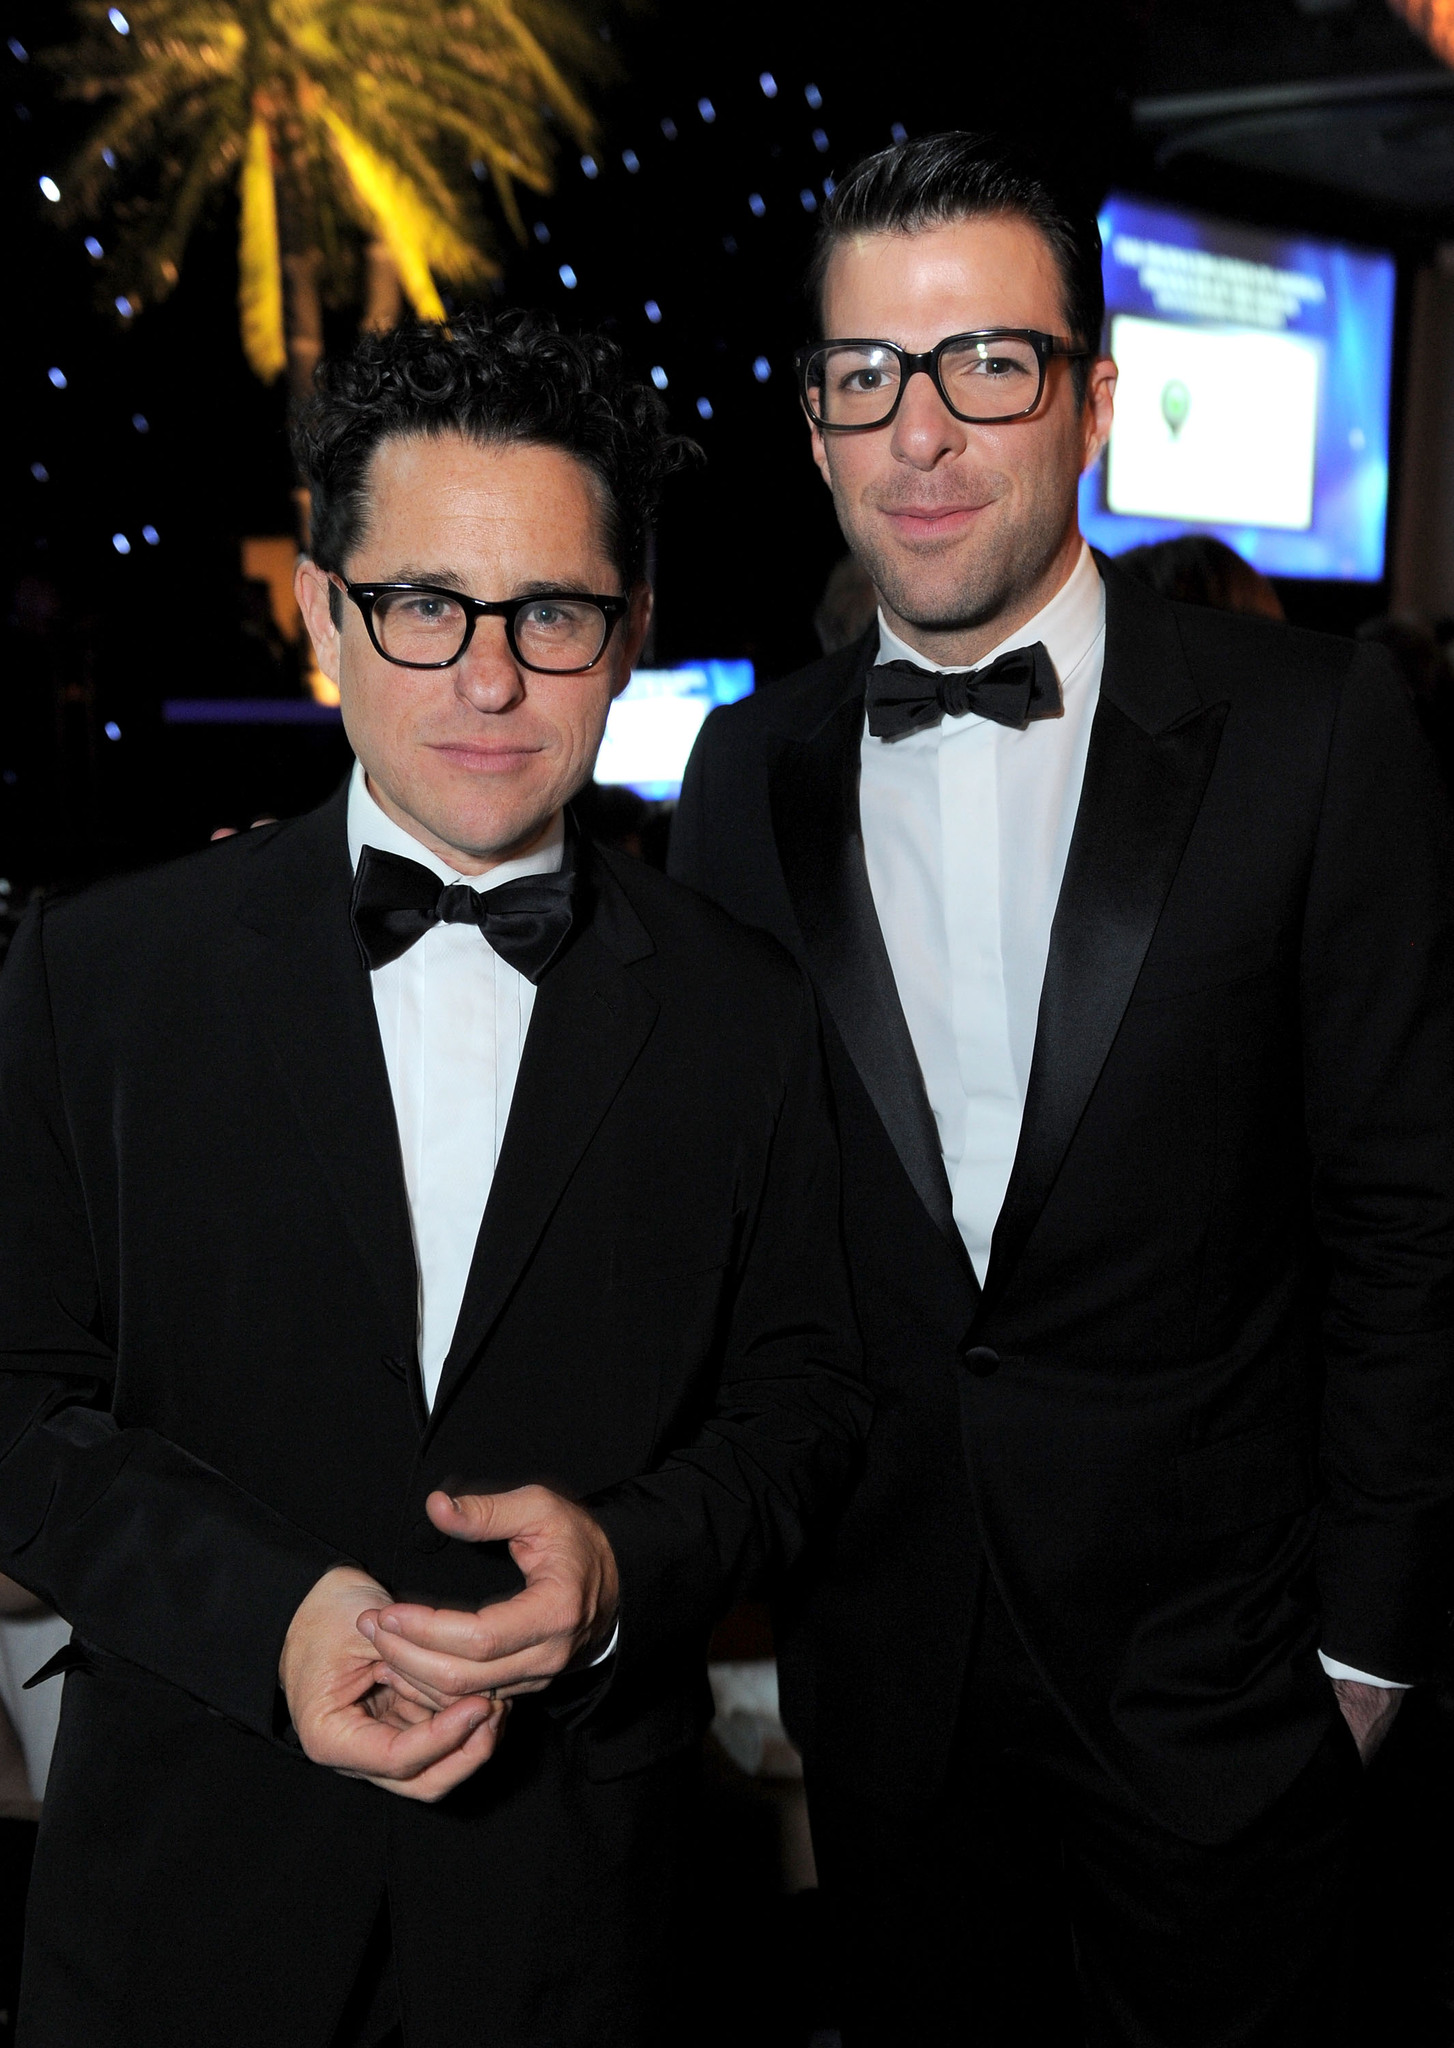 J.J. Abrams and Zachary Quinto